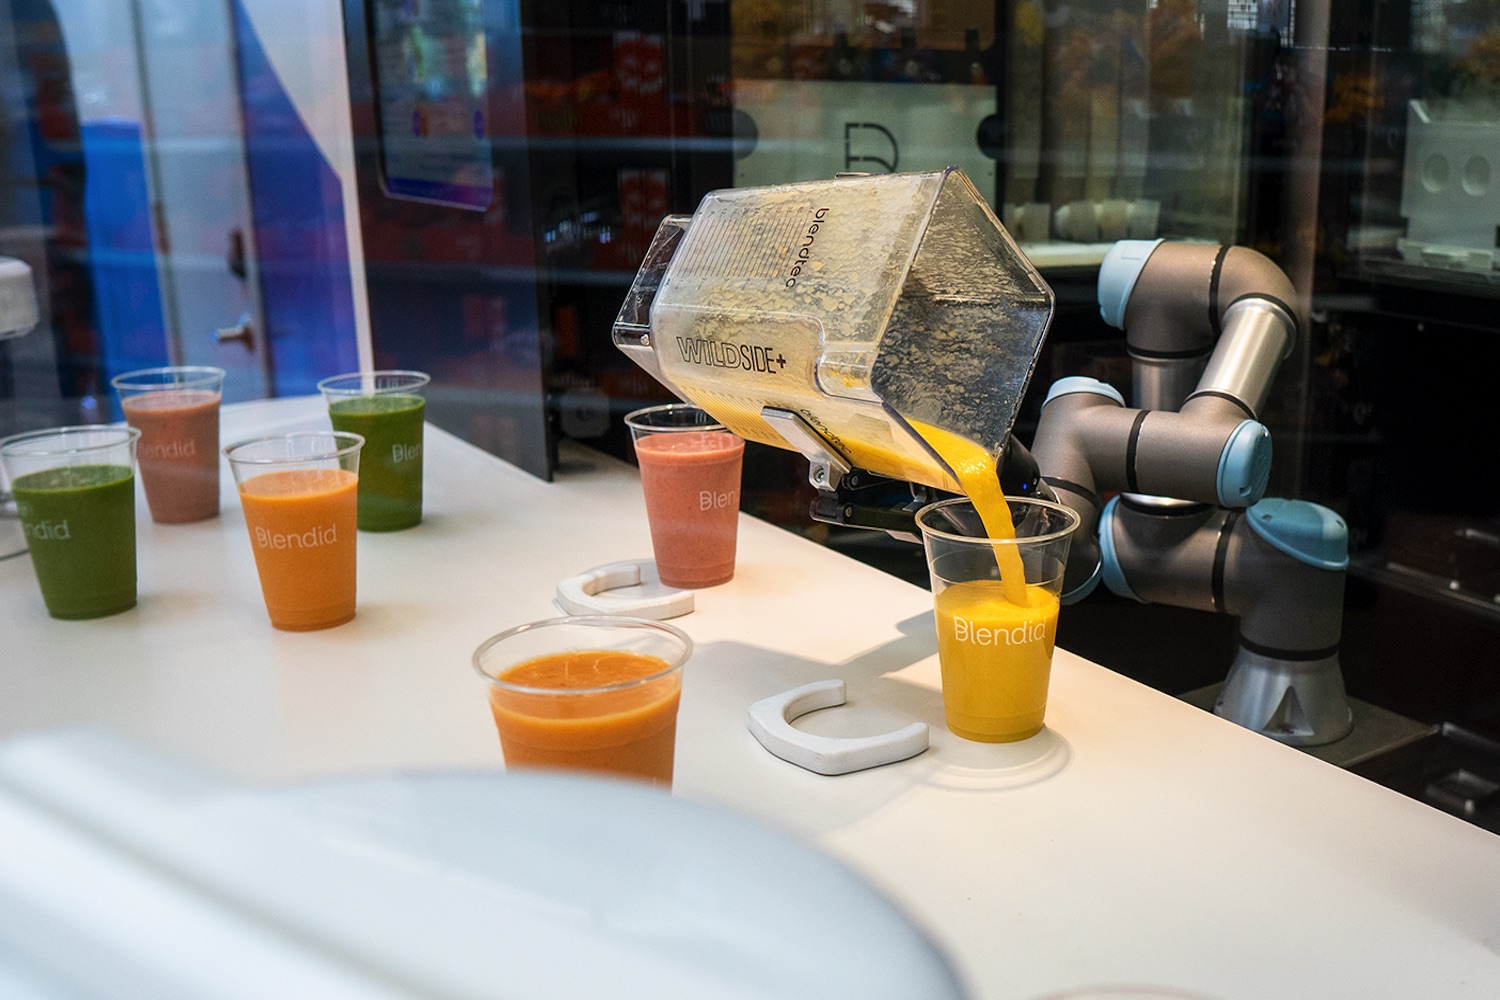 Smoothie-Making Robots Whip Drinks at | Digital Trends